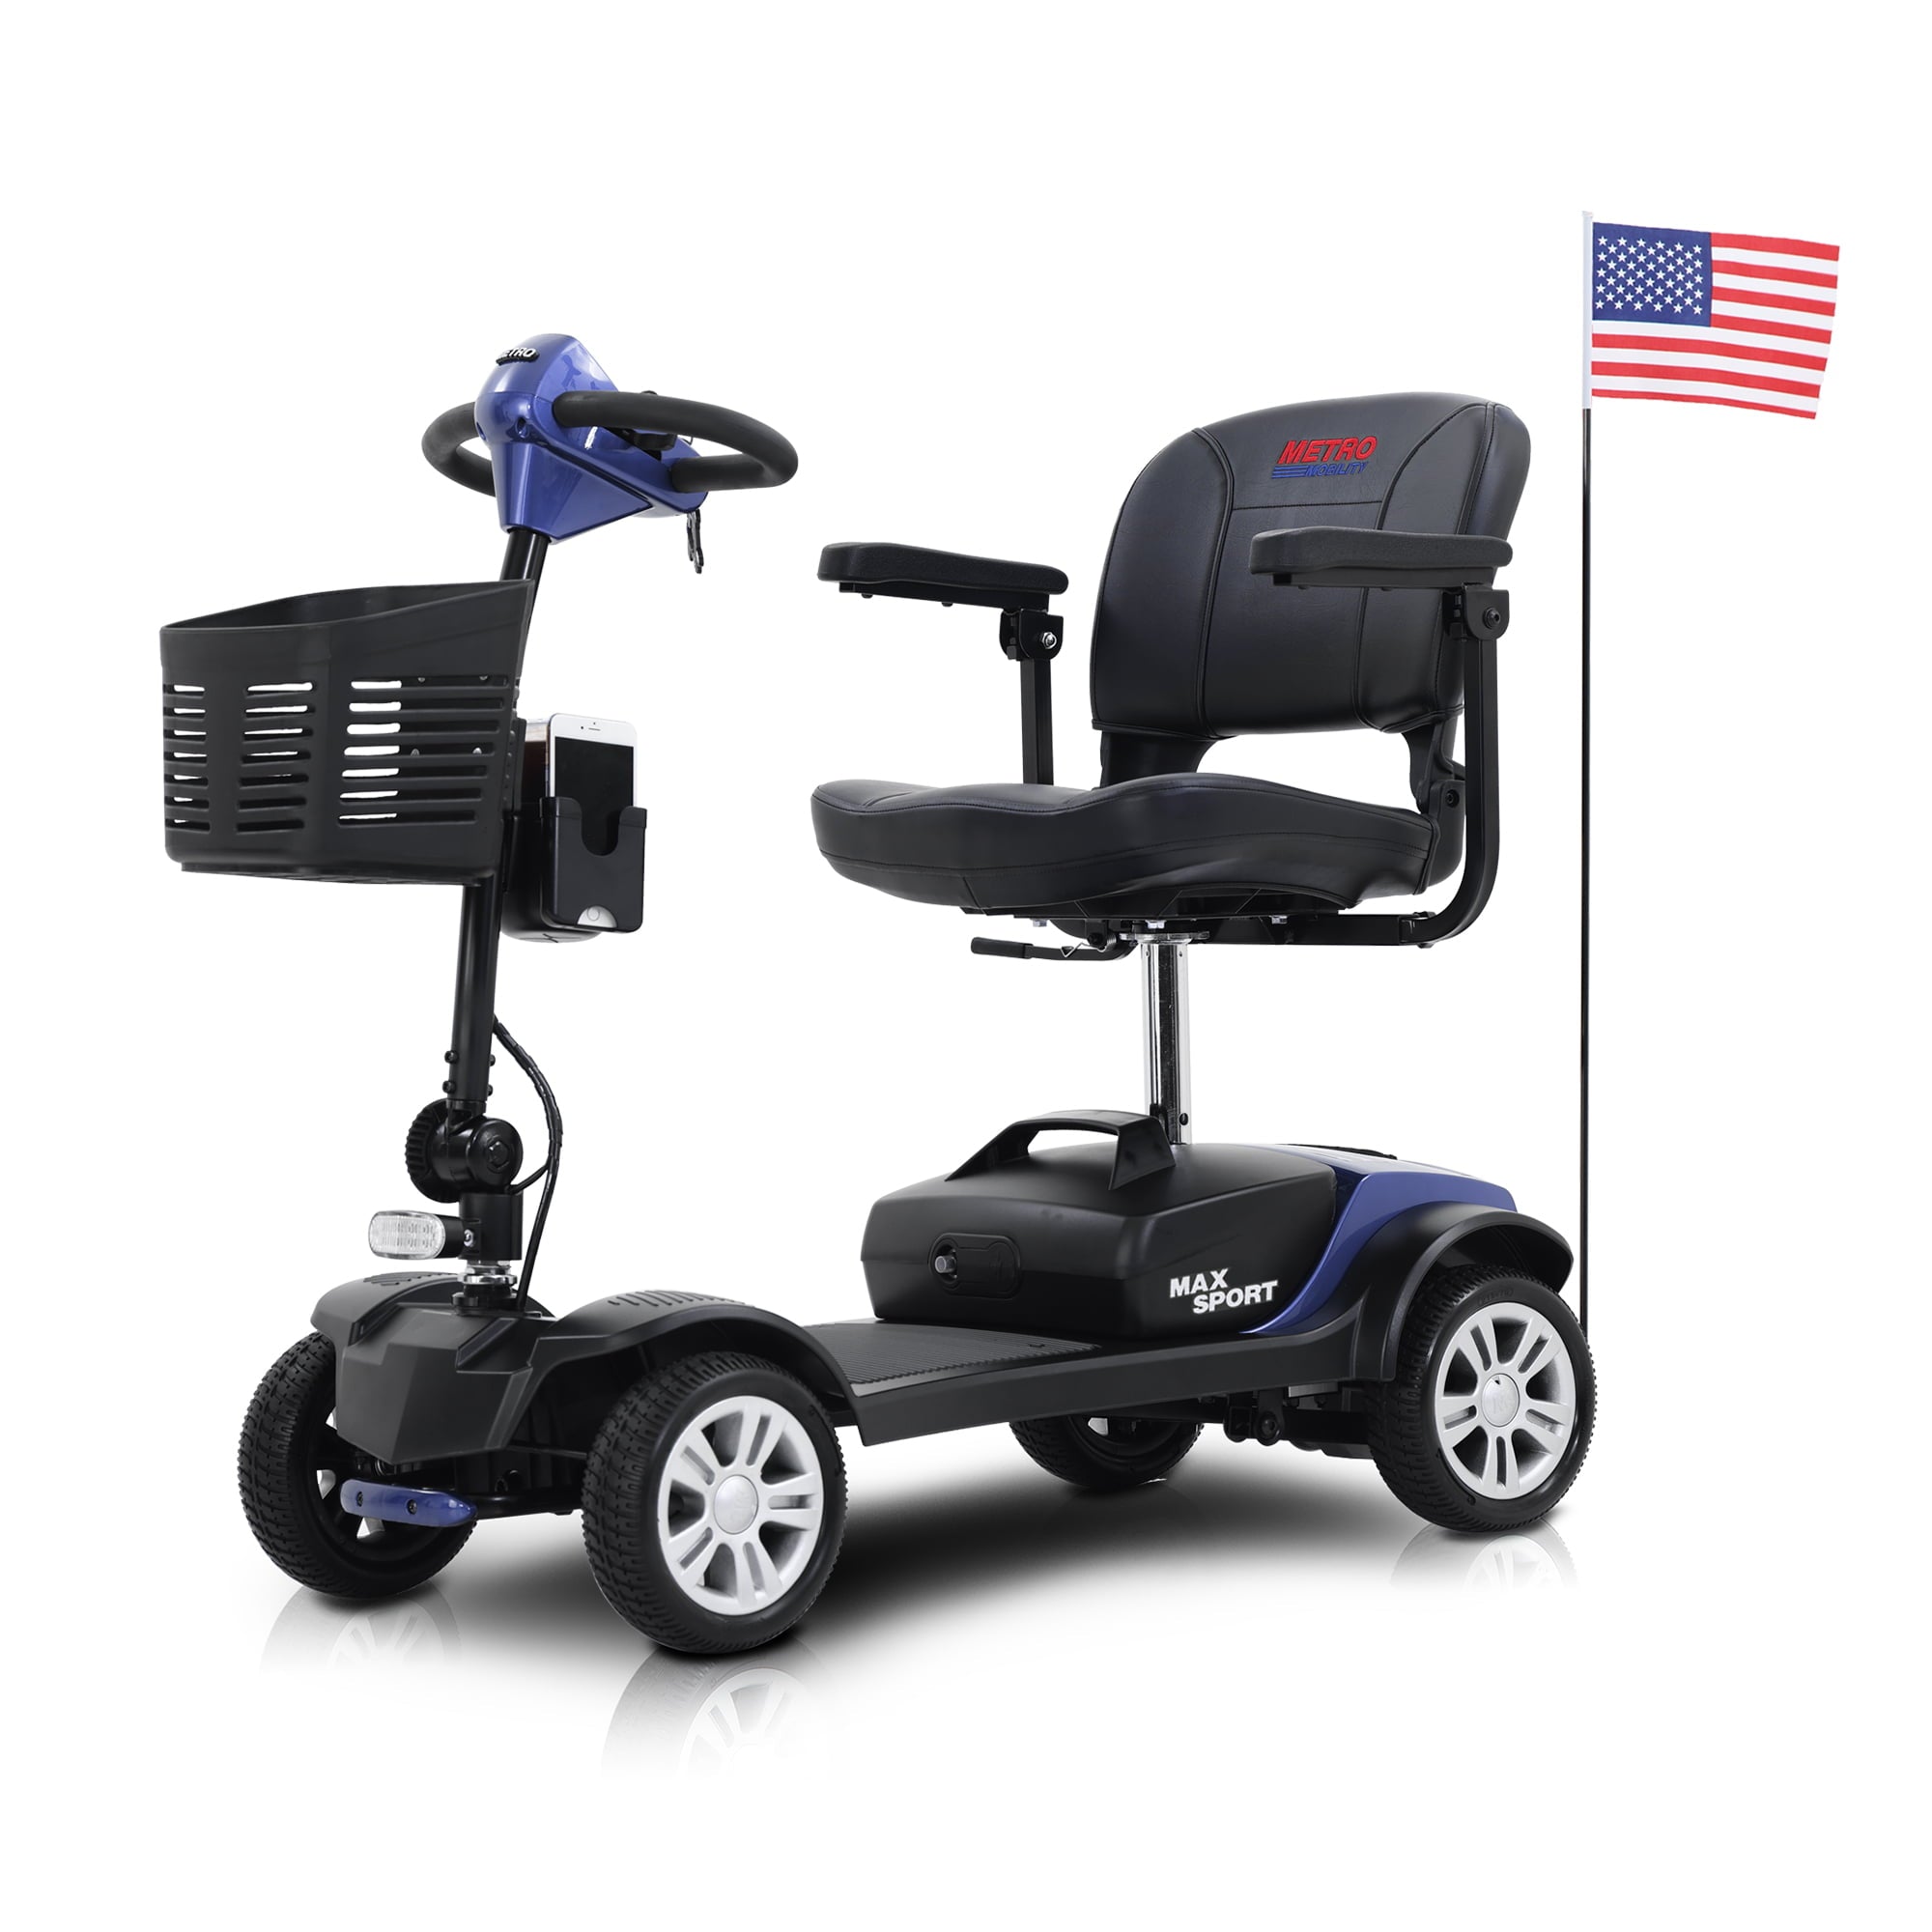 Docooler SPORT BLUE 4 Wheels Outdoor Compact Mobility Scooter with 2 in 1 Cup & Phone Holder